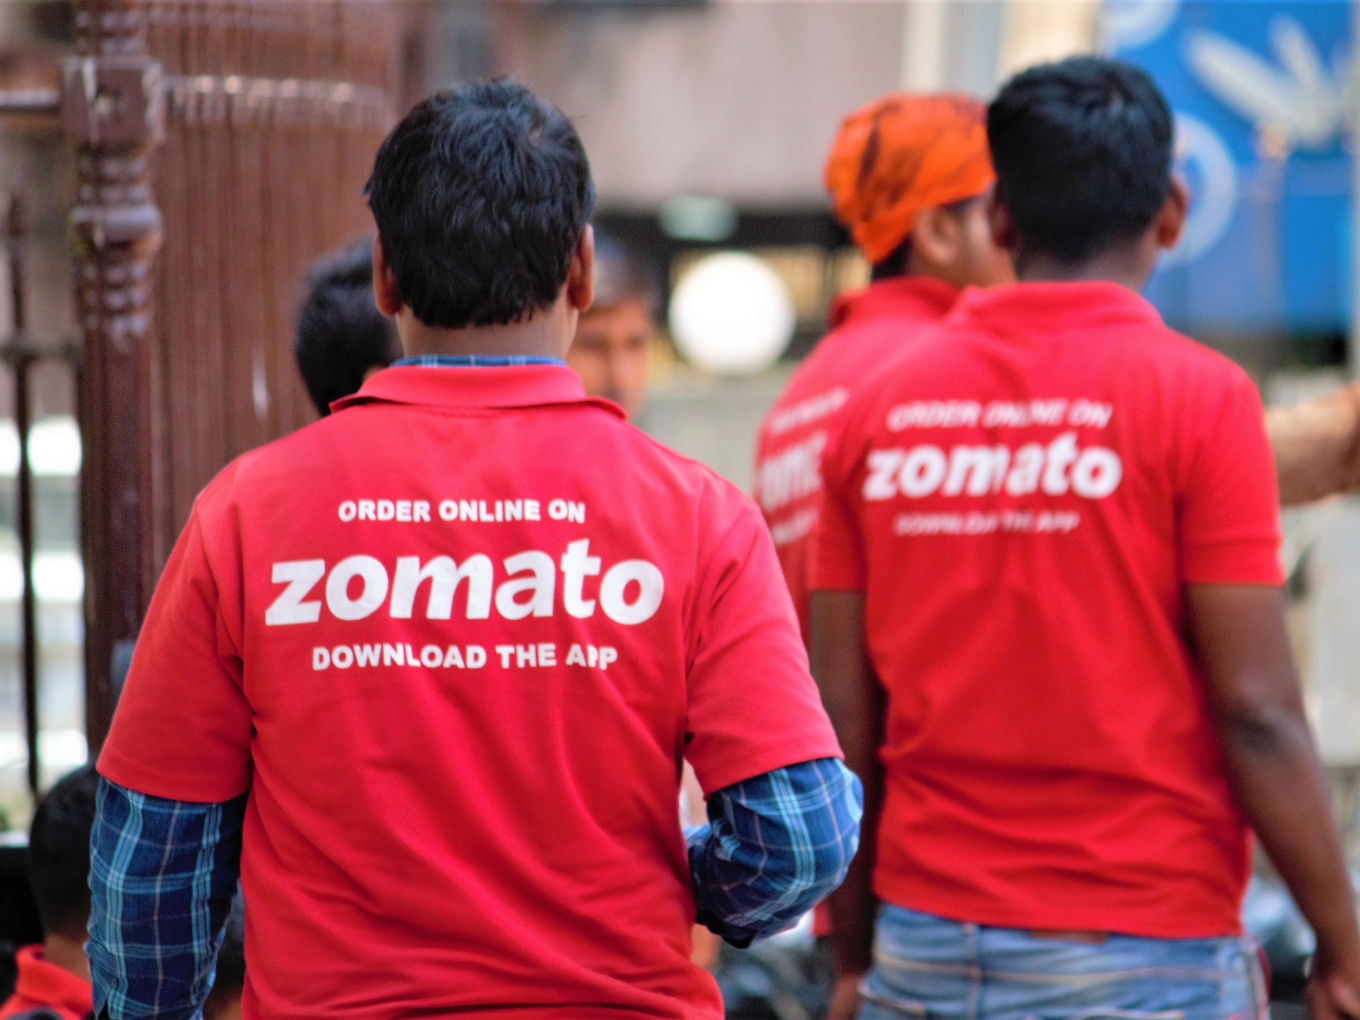 Zomato Beef-Pork Dispute: Zomato Hit By Another Religious Controversy